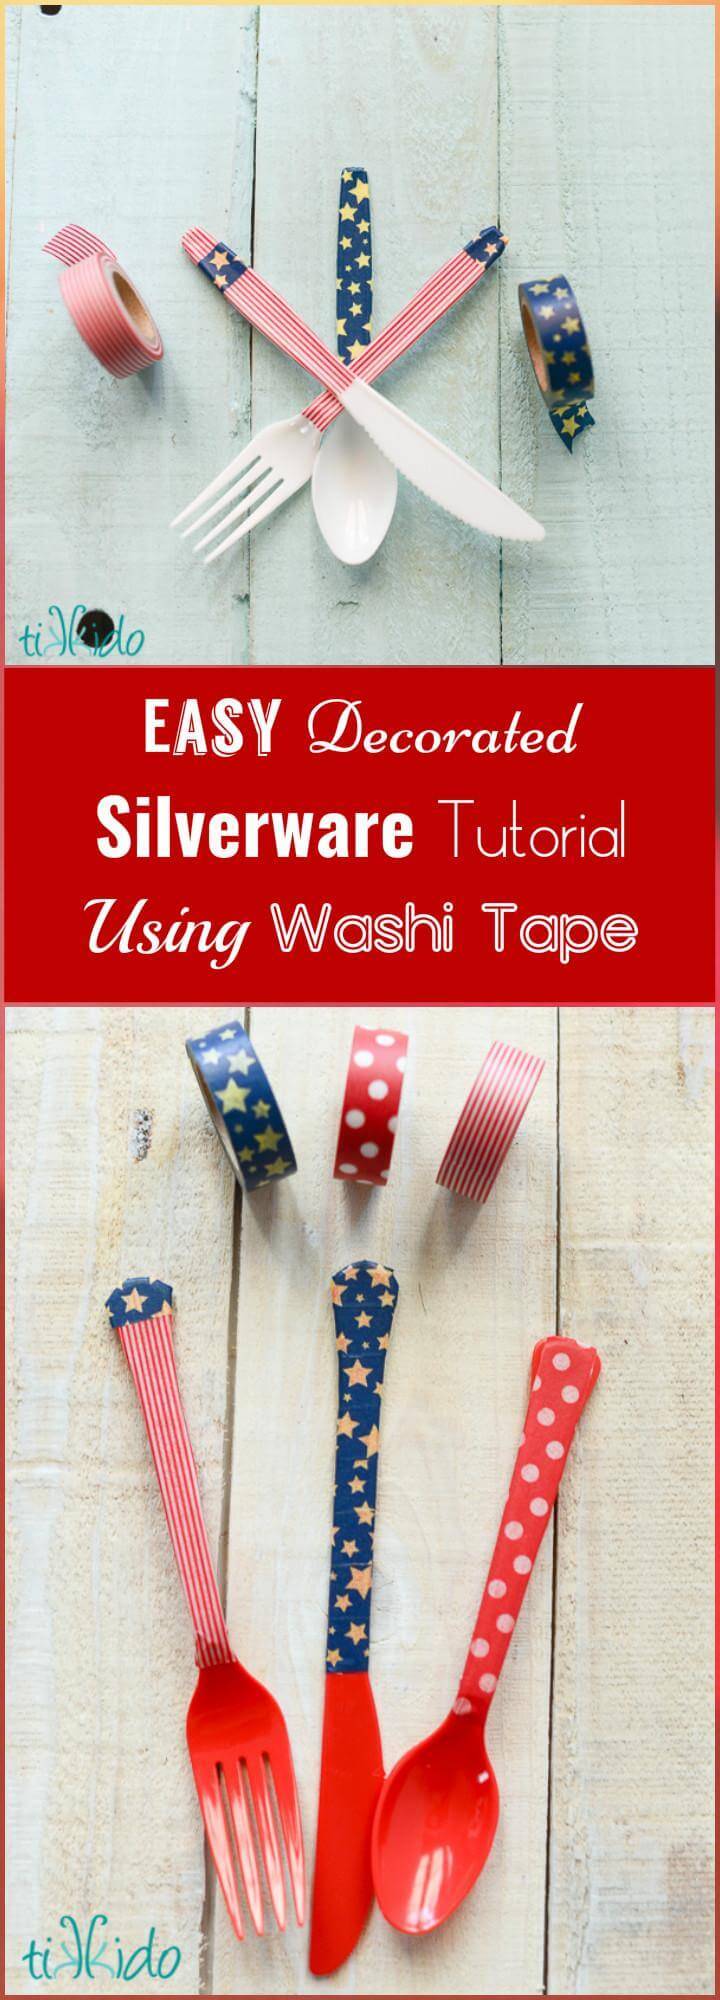 Easy Decorated Silverware Tutorial Using Washi Tape